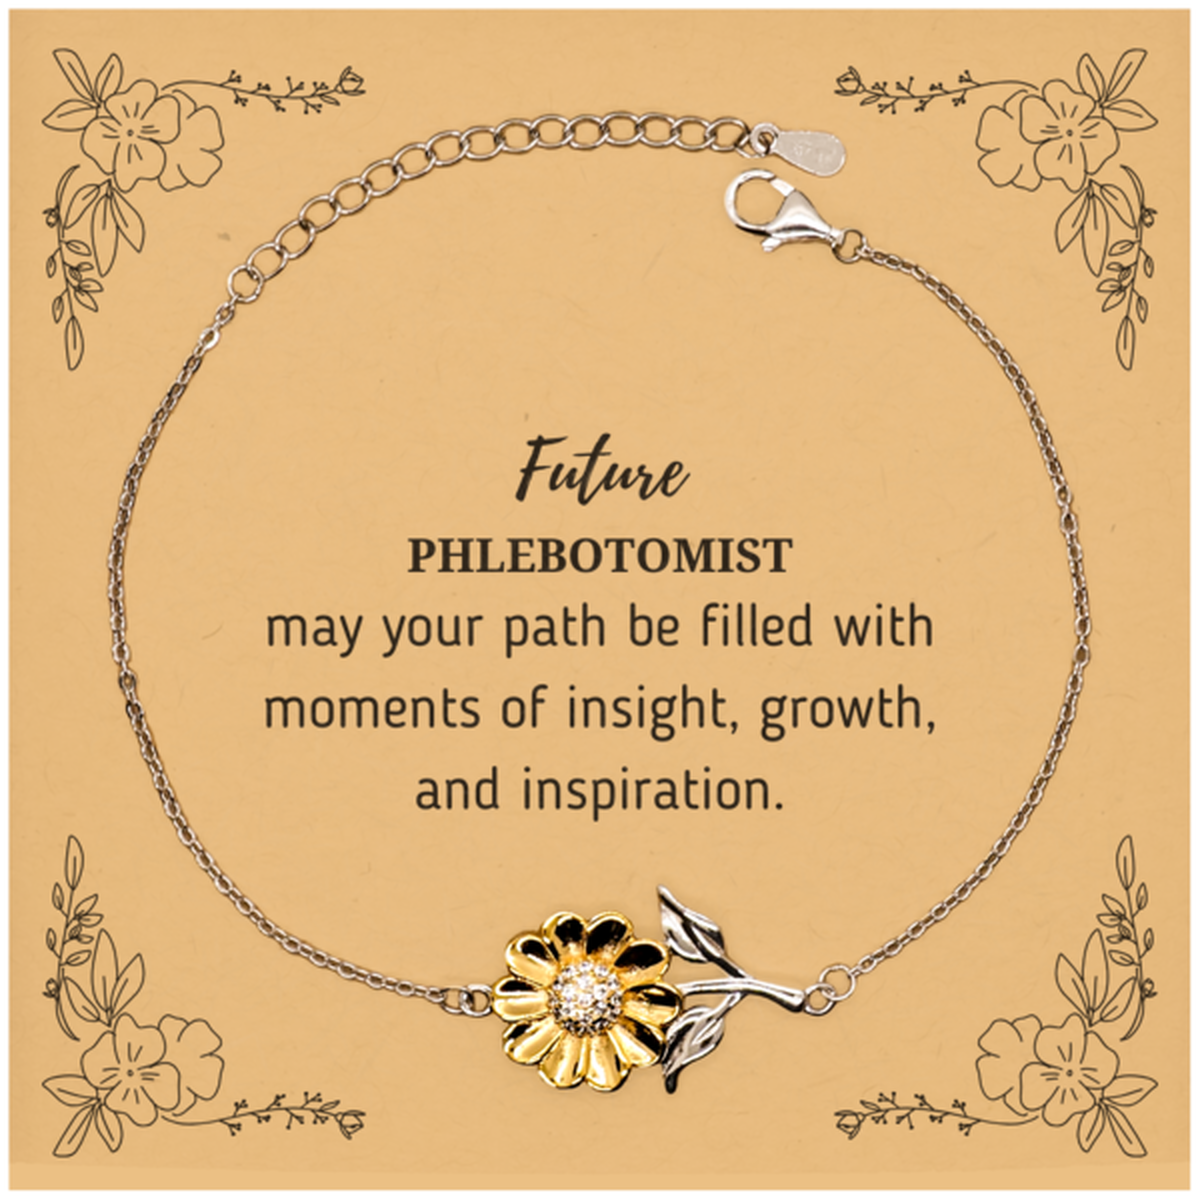 Future Phlebotomist Gifts, May your path be filled with moments of insight, Graduation Gifts for New Phlebotomist, Christmas Unique Sunflower Bracelet For Men, Women, Friends